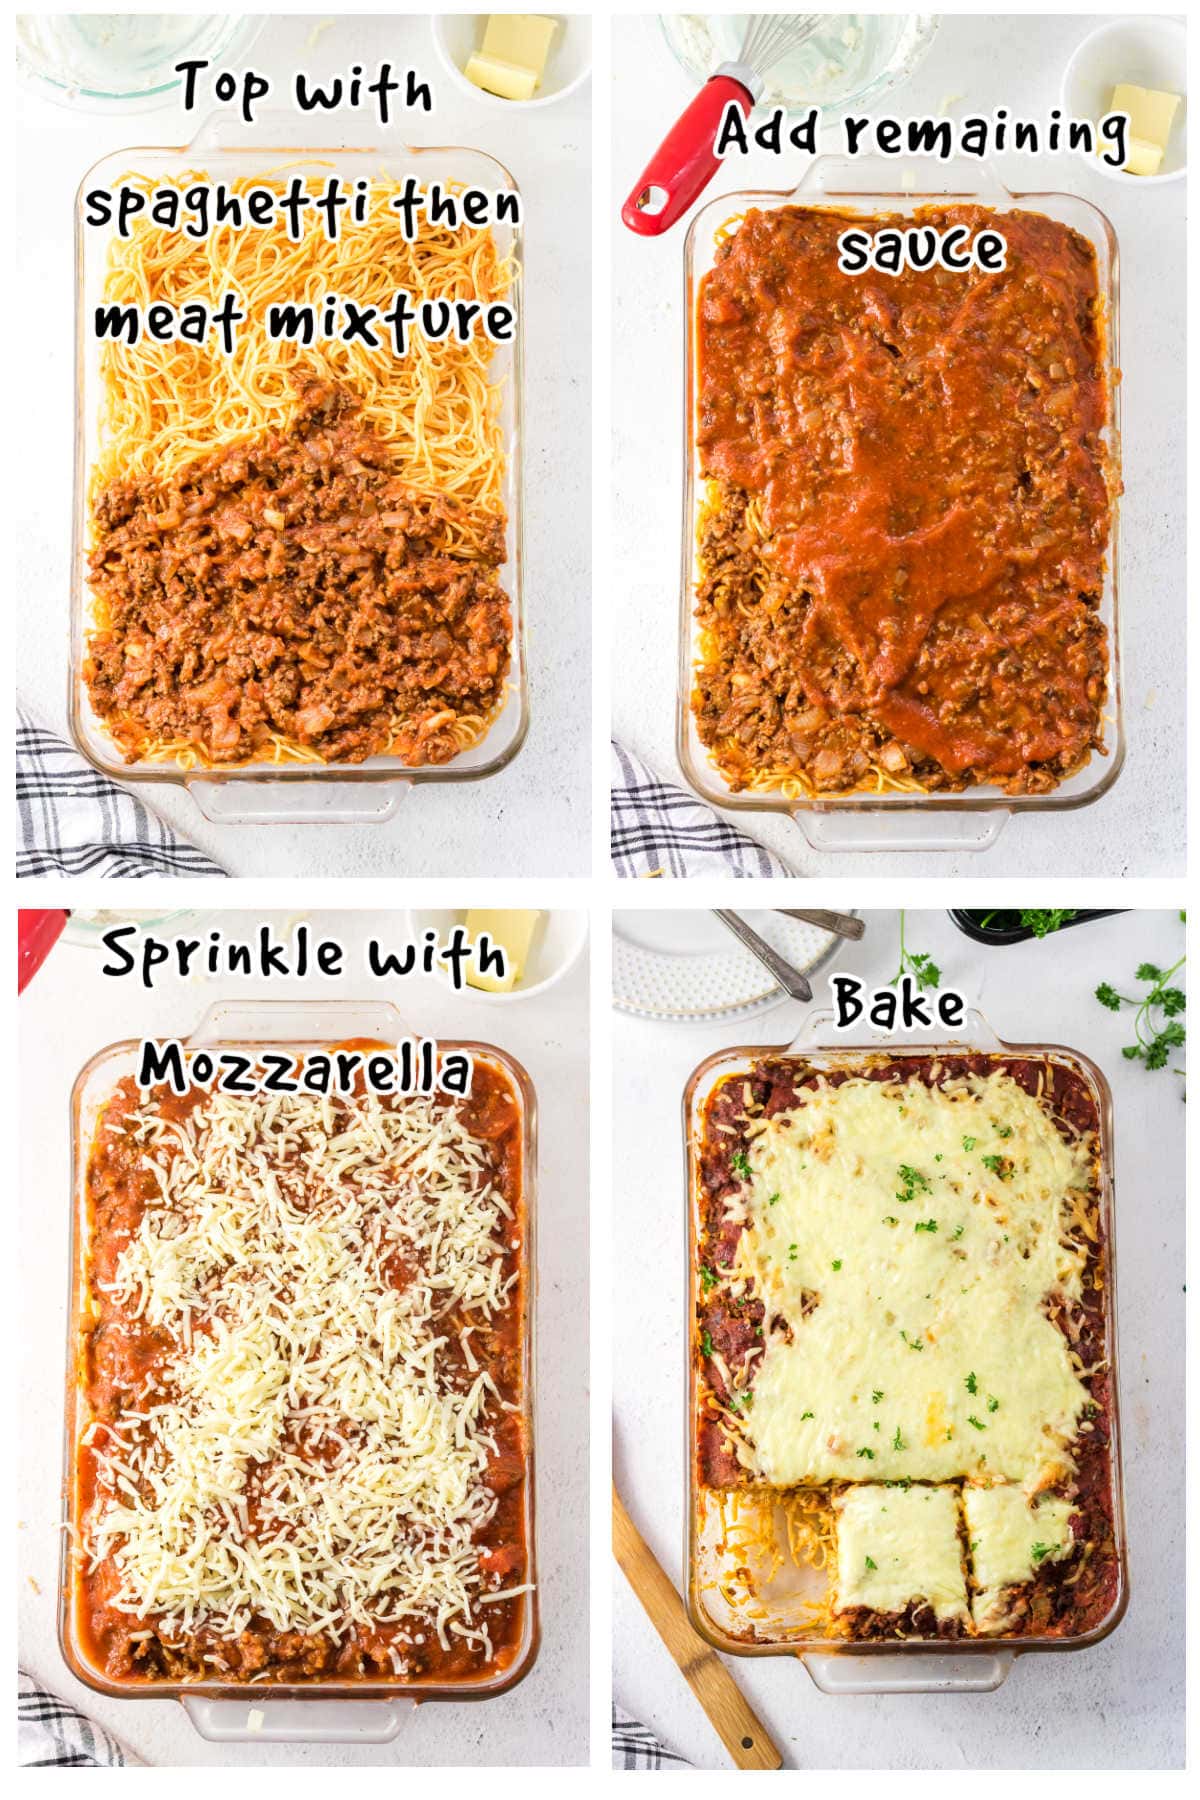 The last four steps of assembling this spaghetti casserole.